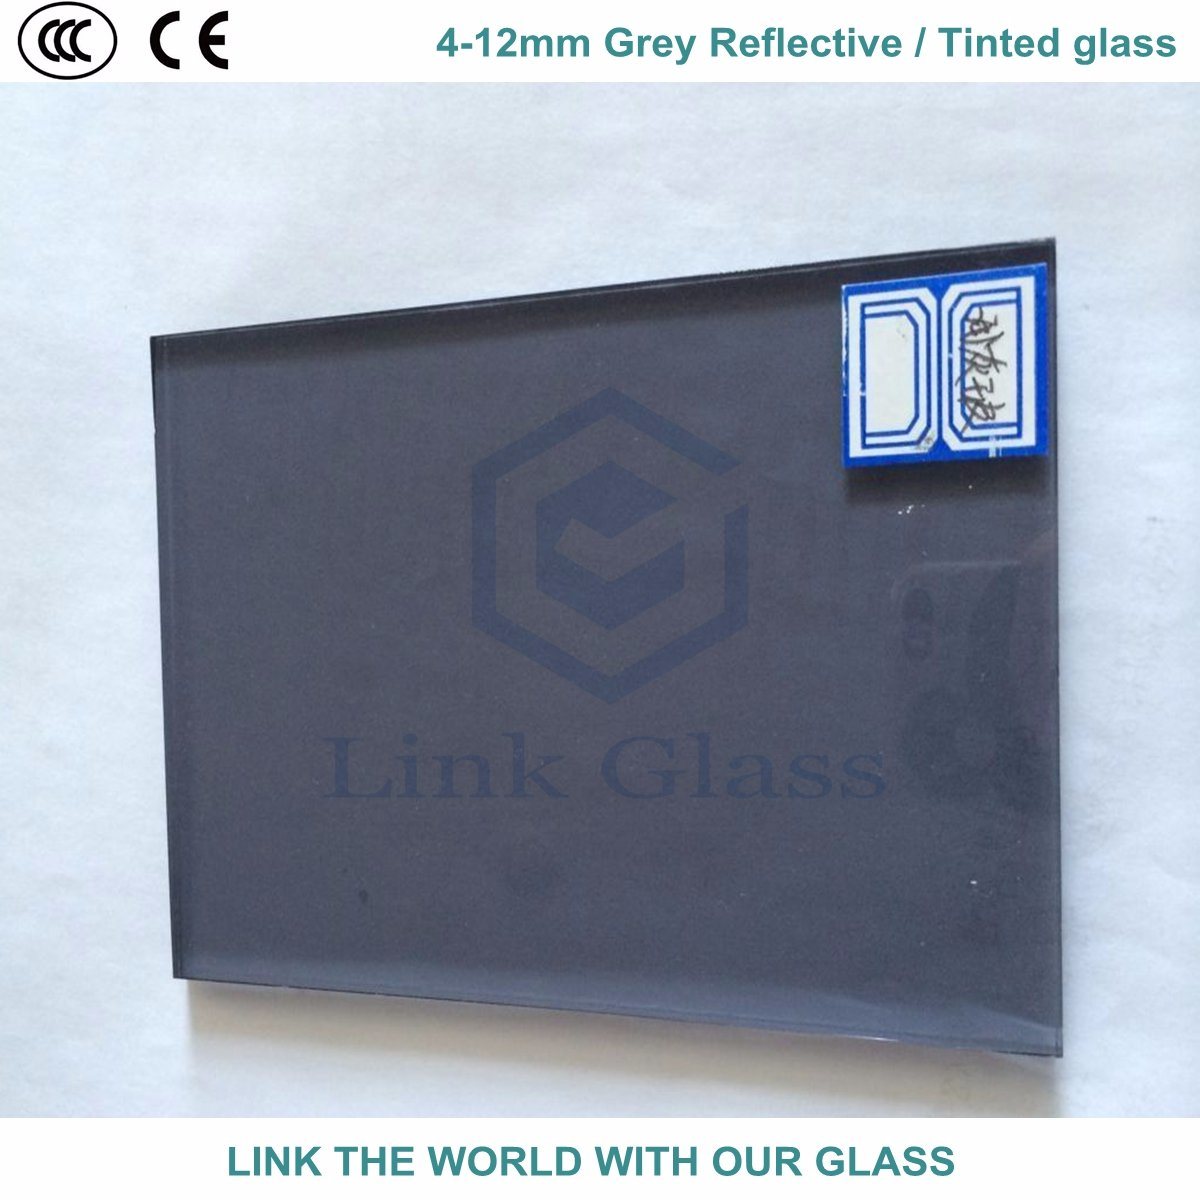 4mm Euro Grey & Dark Grey Reflective / Tinted Glass with Ce & ISO9001 for Glass Window